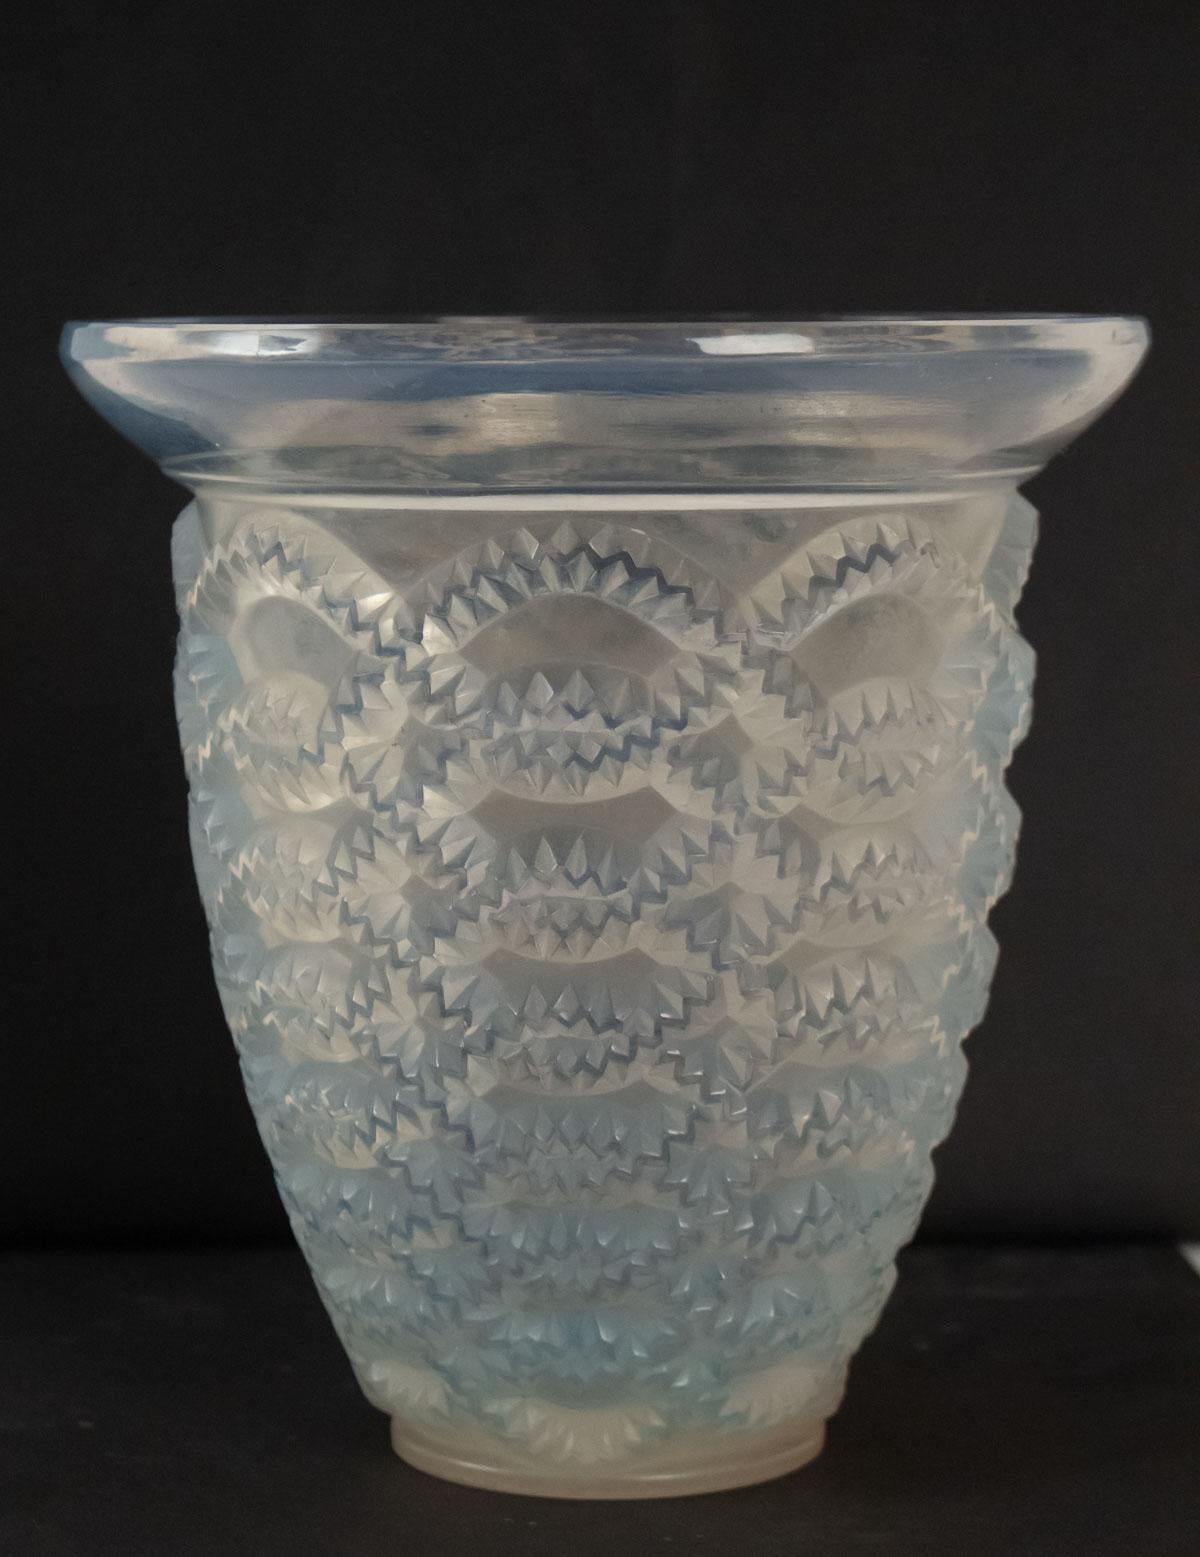 Pressed molded opalescent glass 21 cm tall
Model created in 1935
Bibliography: Marcilhac Model: 10-887
Ress molded garlands decorated body under a widening undecorated top rim.
 